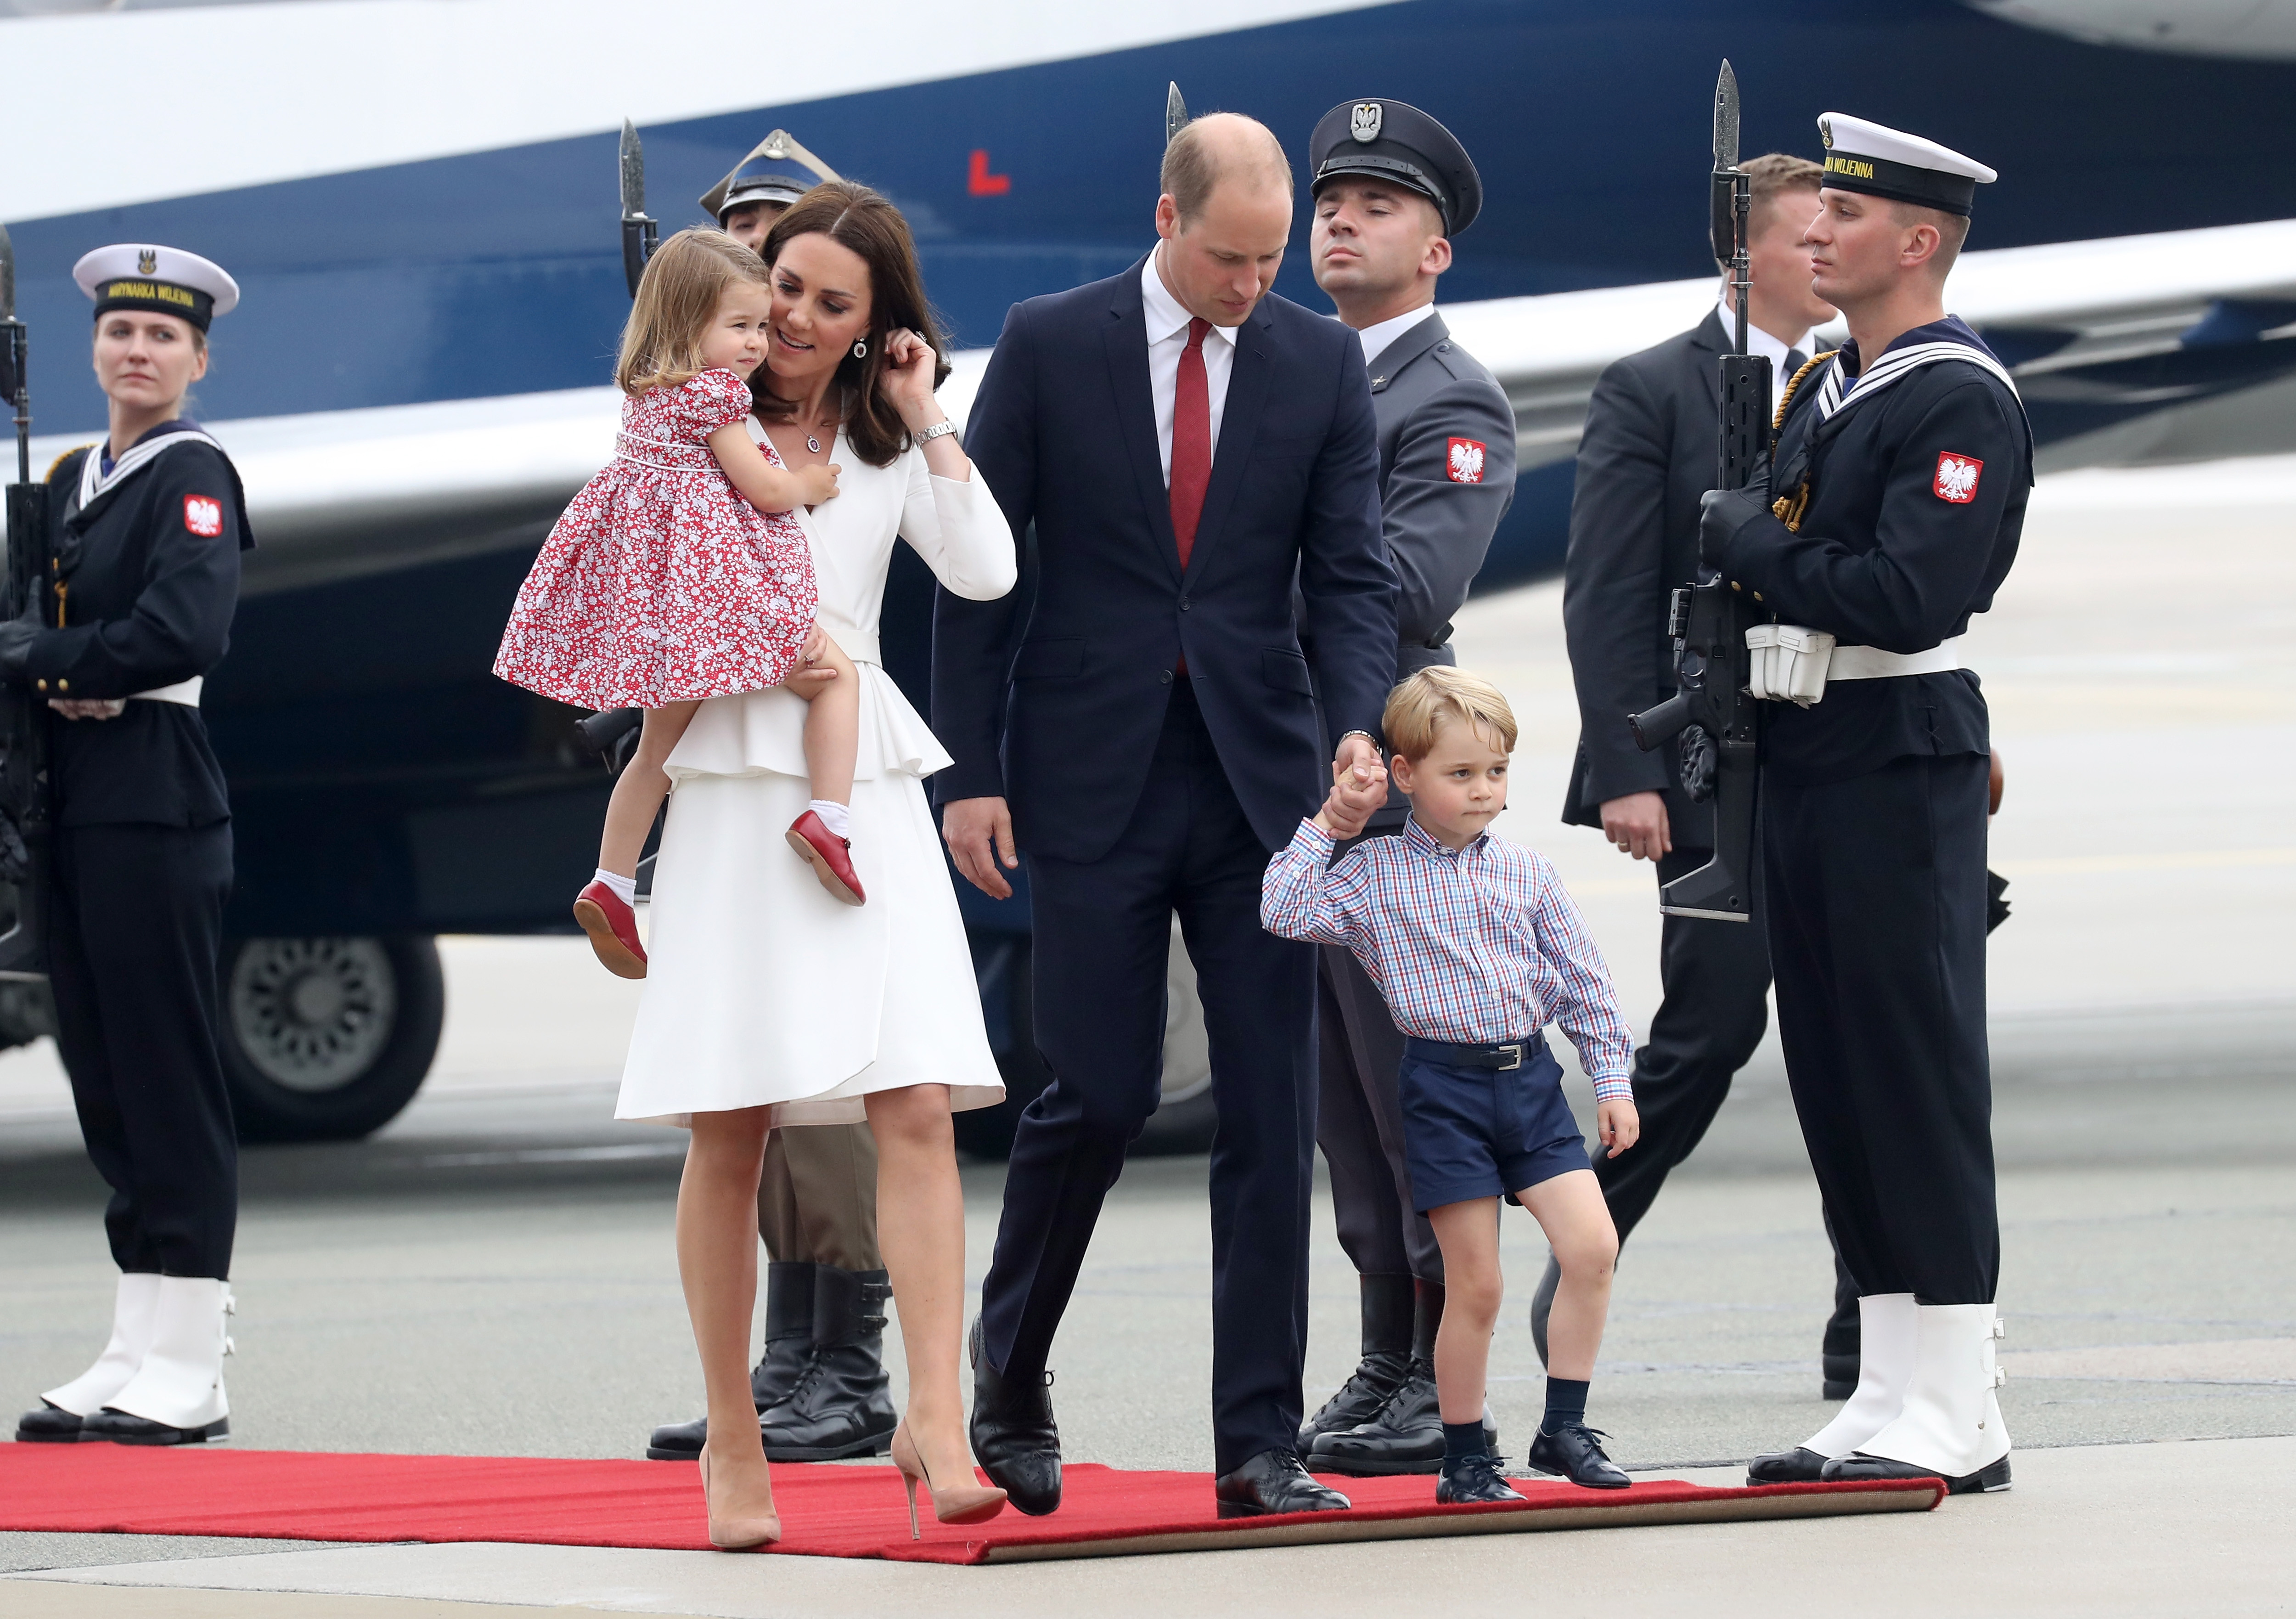 Catherine, Duchess of Cambridge and Prince William, Duke of Cambridge with their children Princess Charlotte of Cambridge and Prince George of Cambridge as they arrive in Poland.